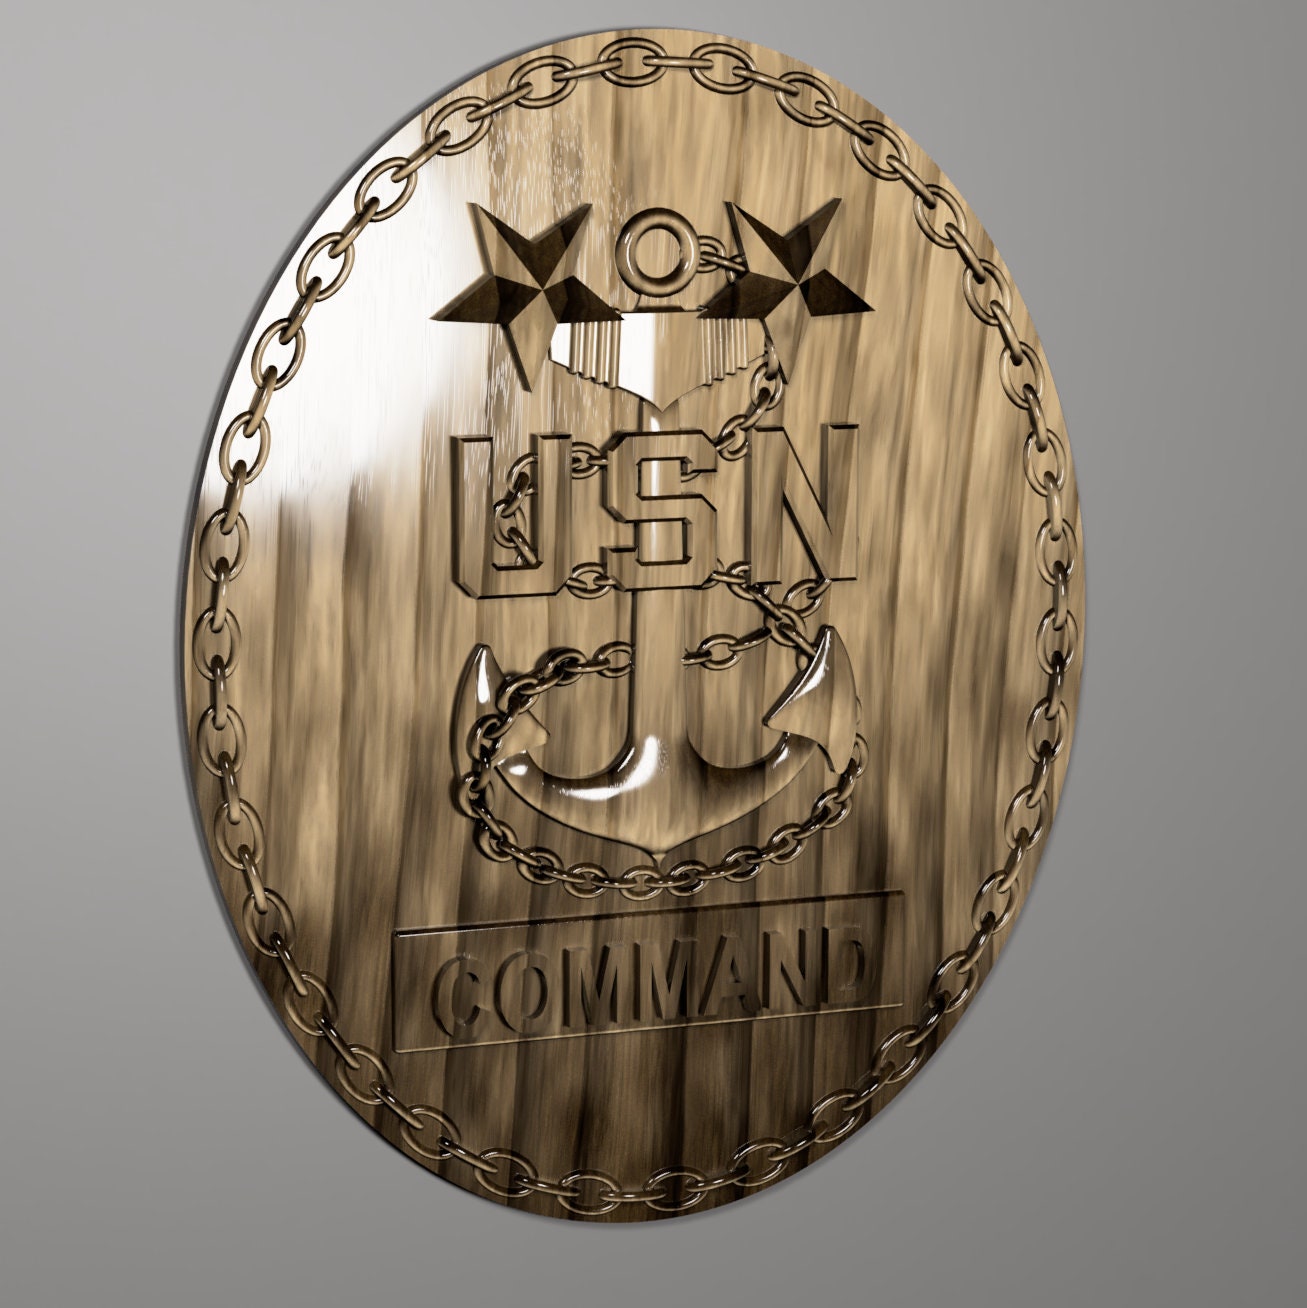 Navy Command Master Chief (CMC) insignia 3D stl file for CNC router